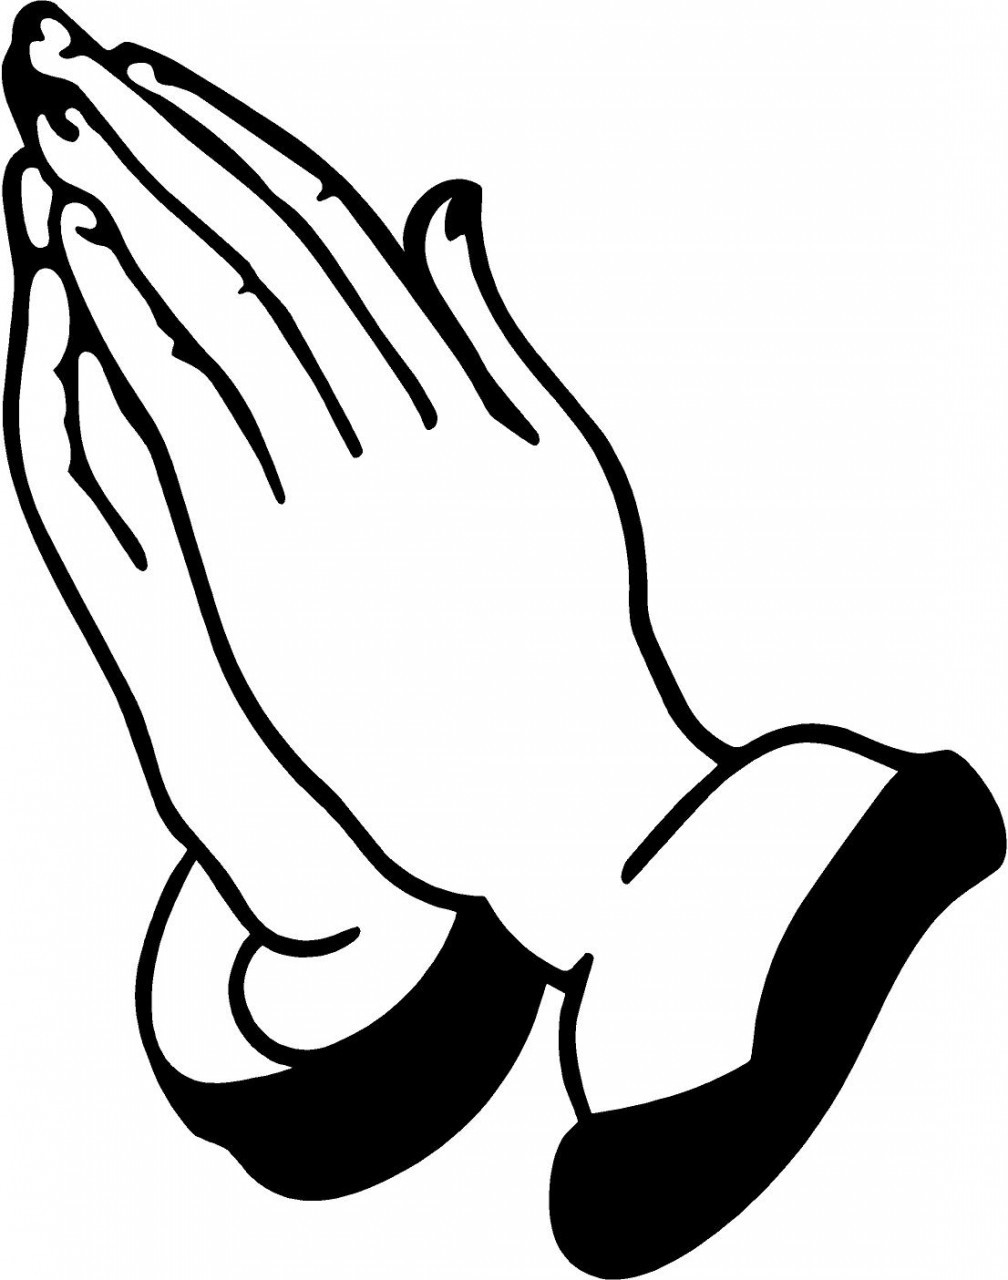 Praying Hands Clipart craft projects, Symbols Clipart - Clipartoons